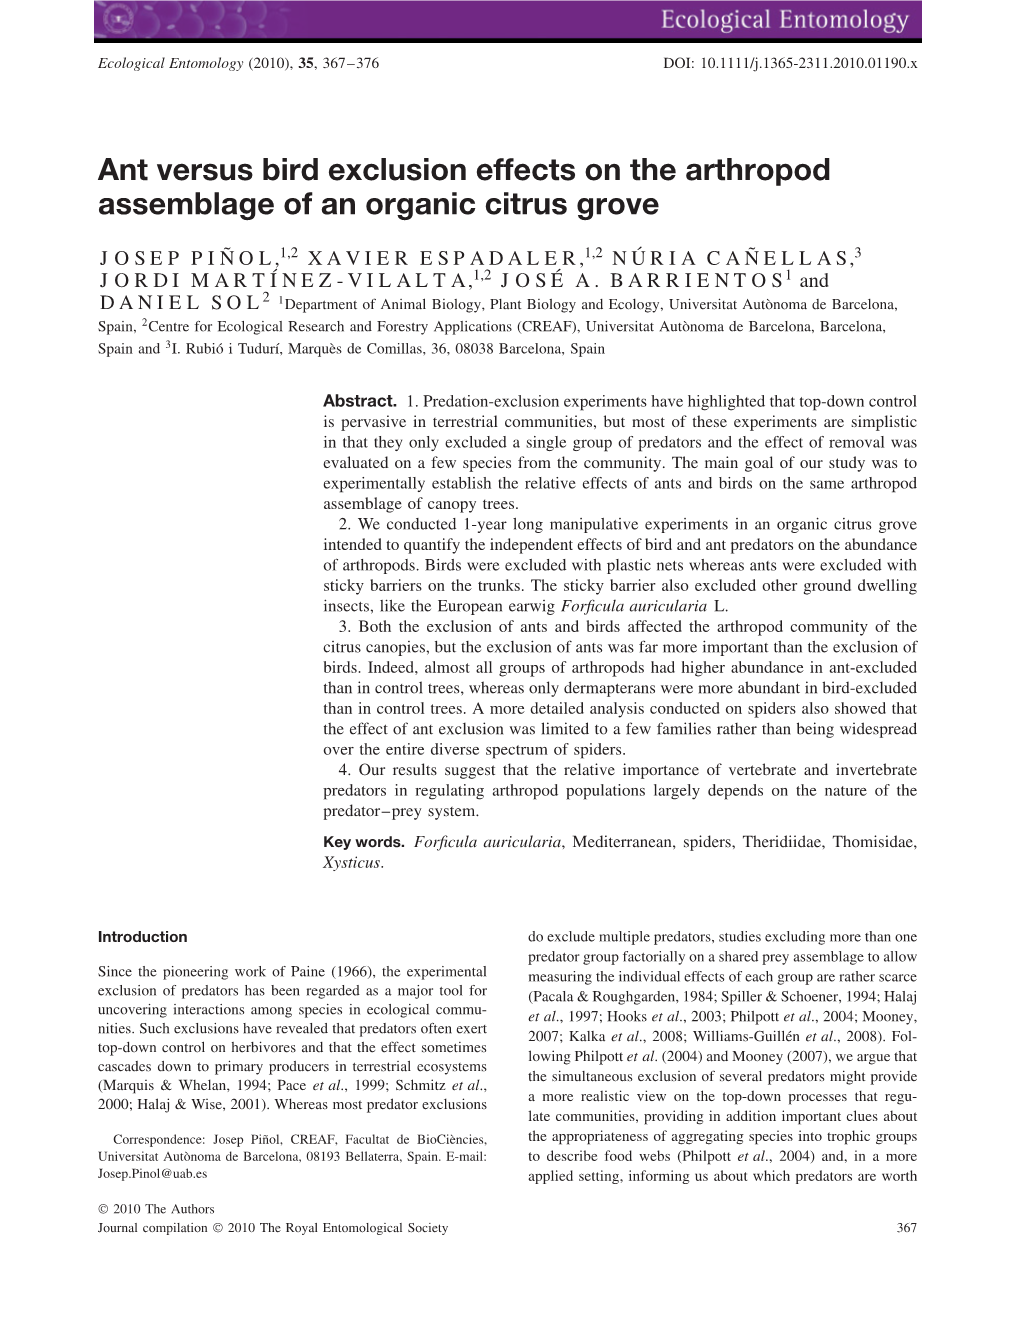 Ant Versus Bird Exclusion Effects on the Arthropod Assemblage of an Organic Citrus Grove